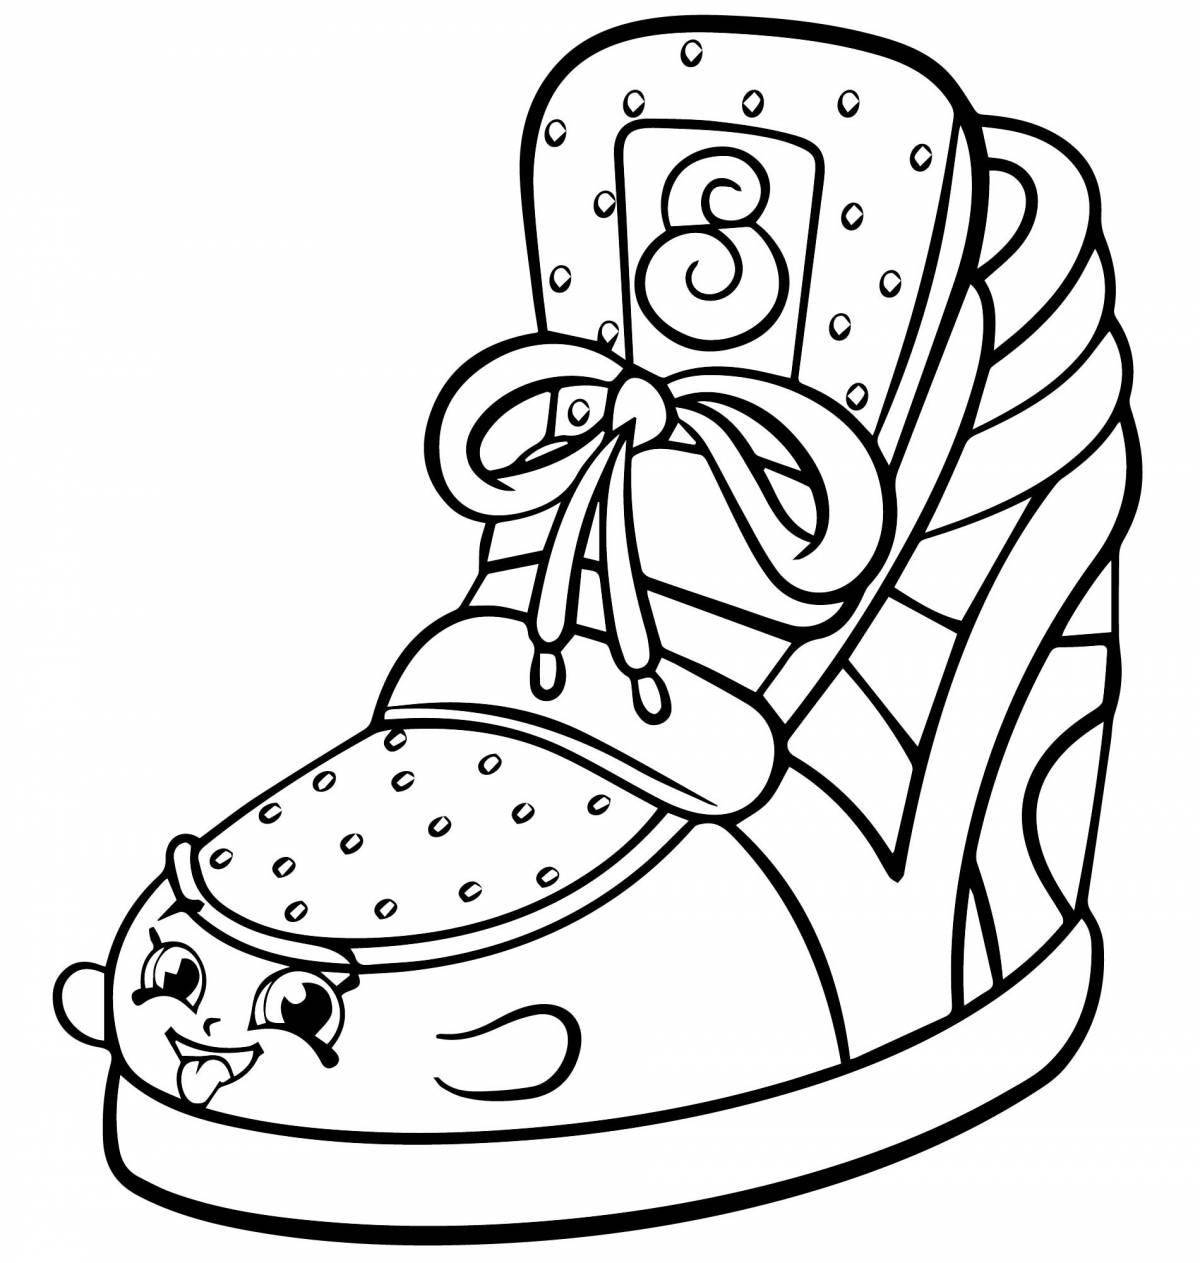 Coloring page adorable shoes for children 3-4 years old